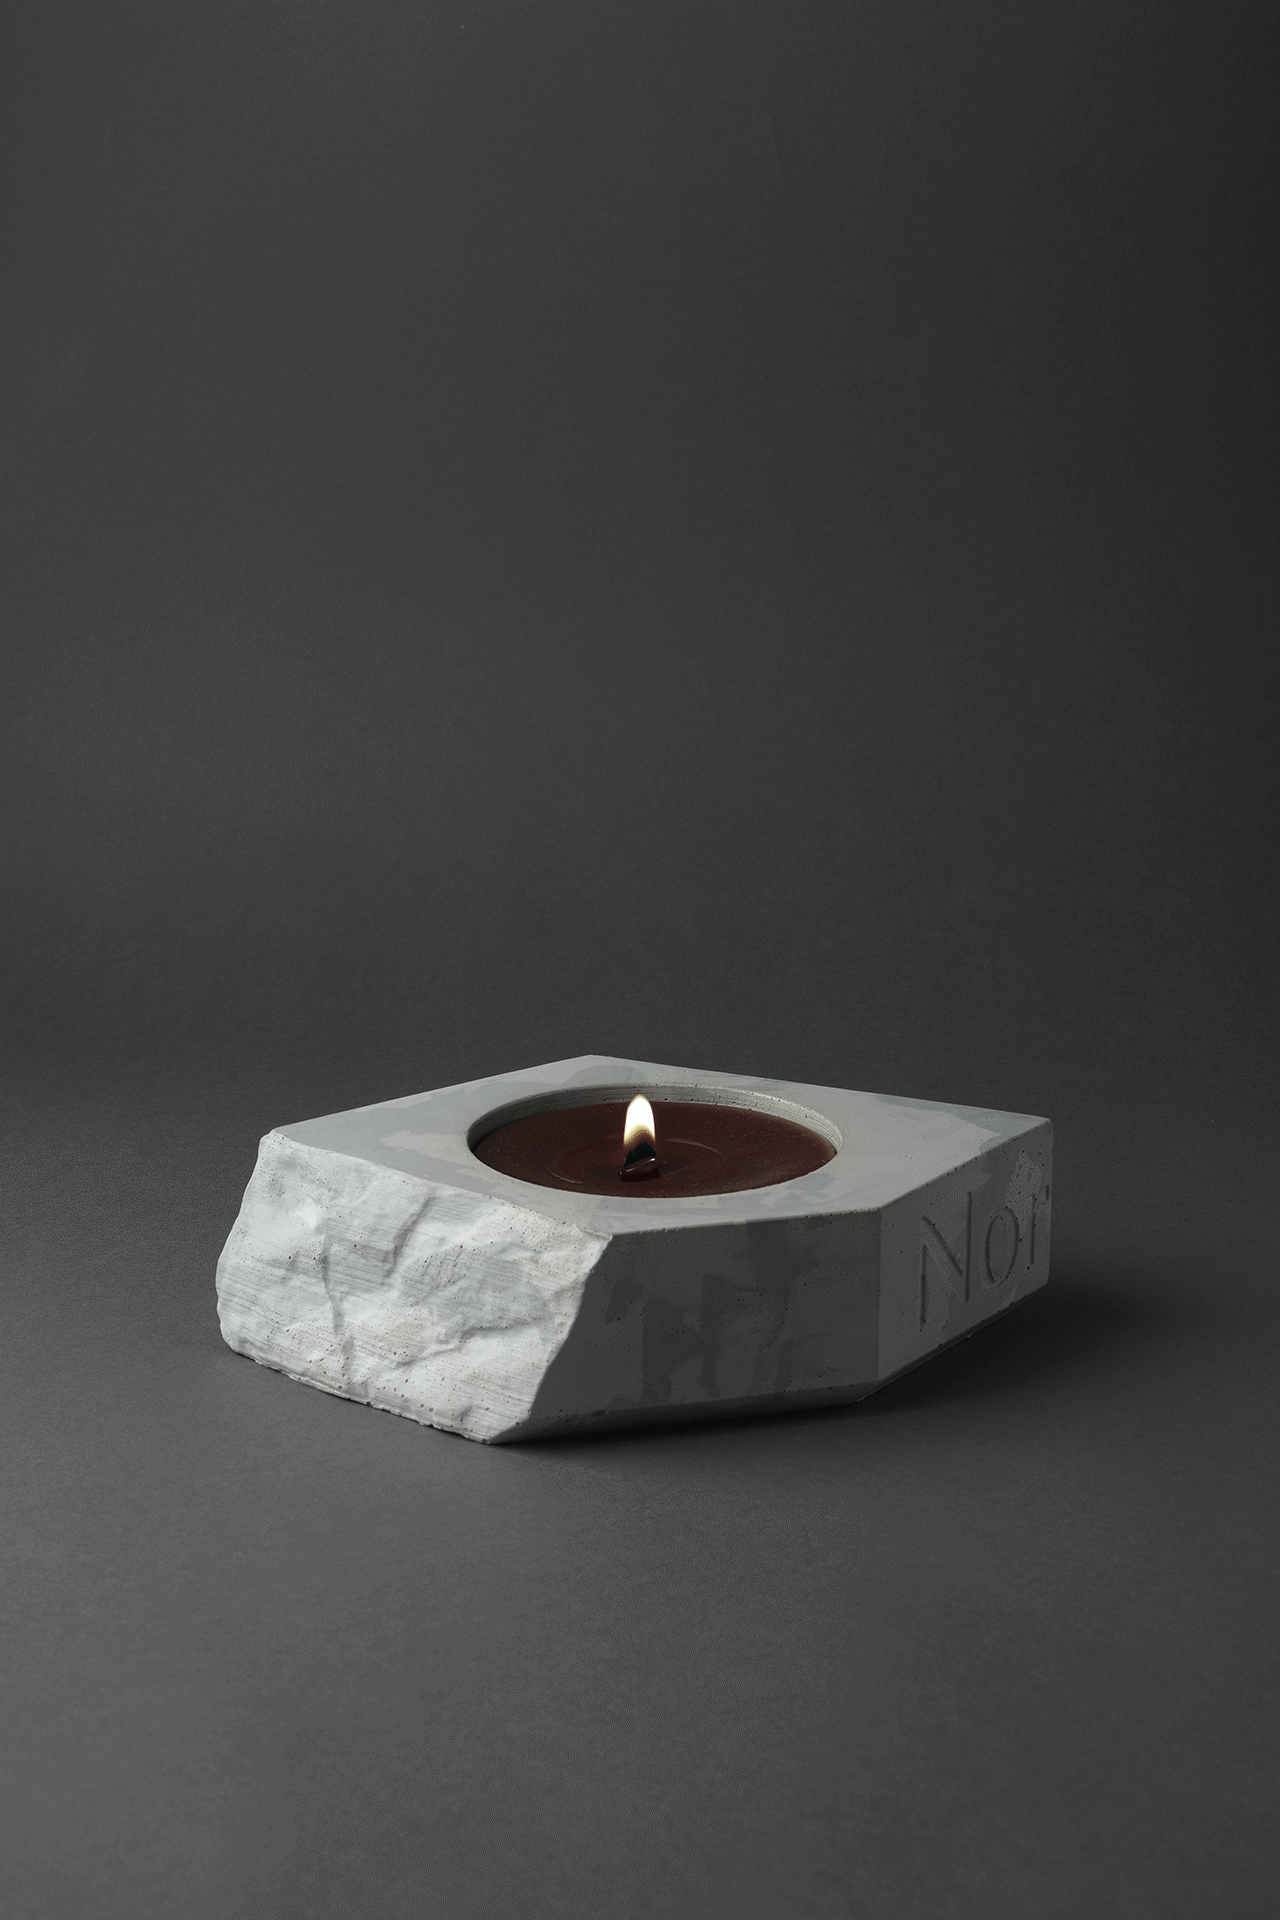 Recycled candle self-promotional gift - Noreste Studio